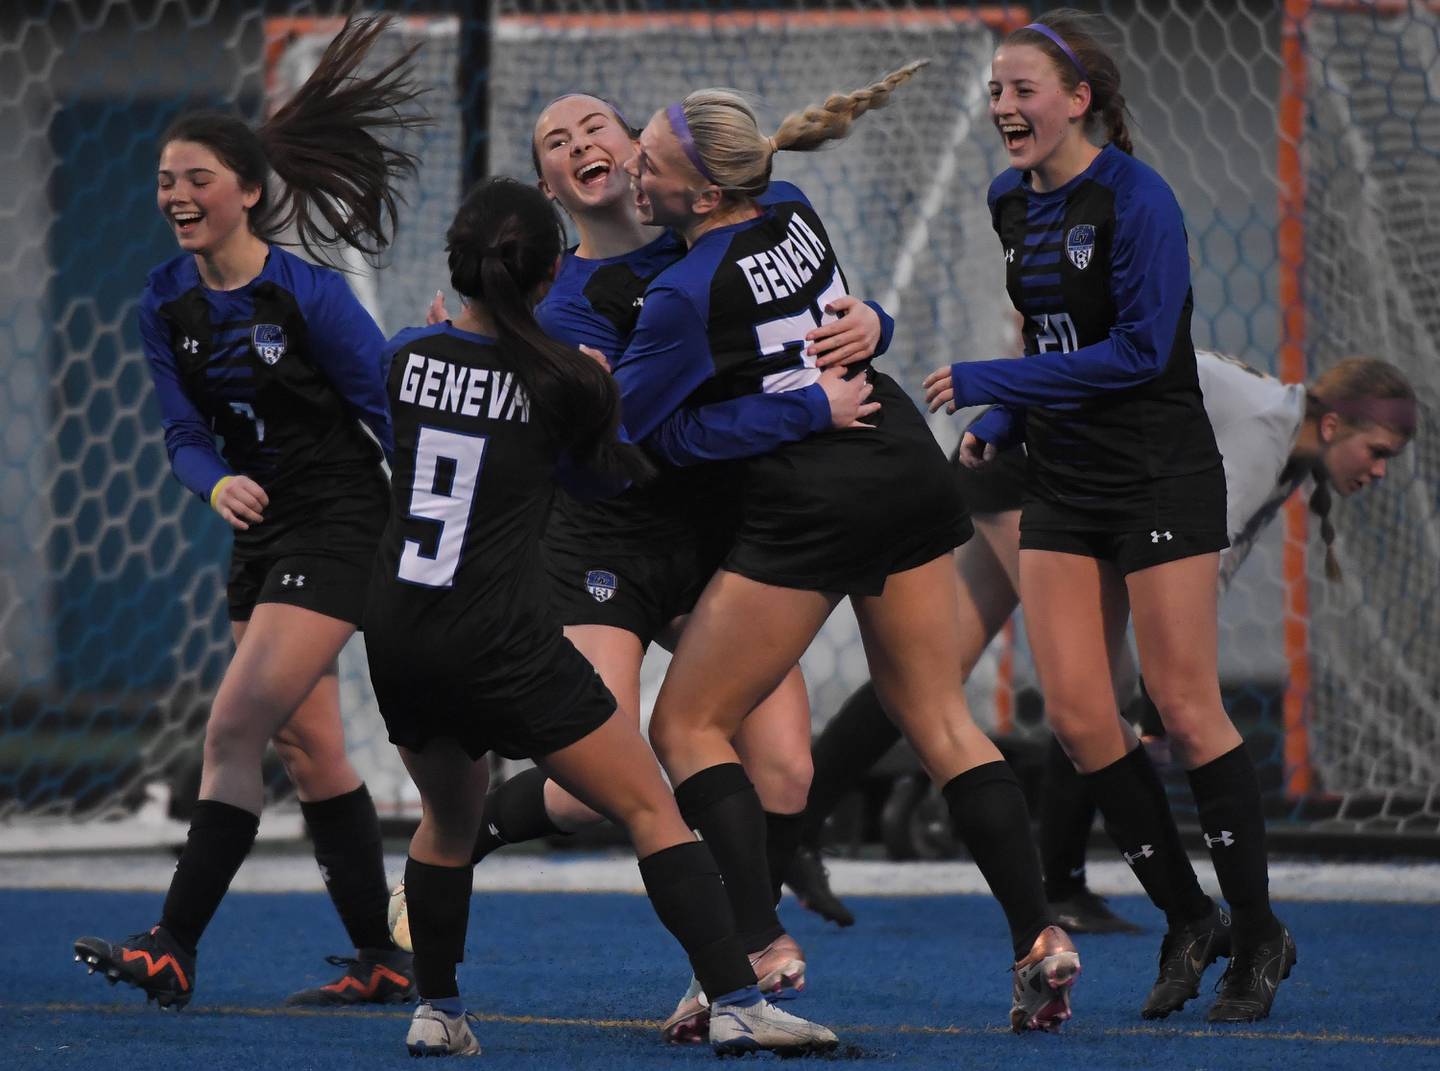 Geneva’s Julianna Drew is surrounded by teammates after her first-half goal against Neuqua Valley in a girls soccer game in Geneva on Thursday, March 23, 2023.